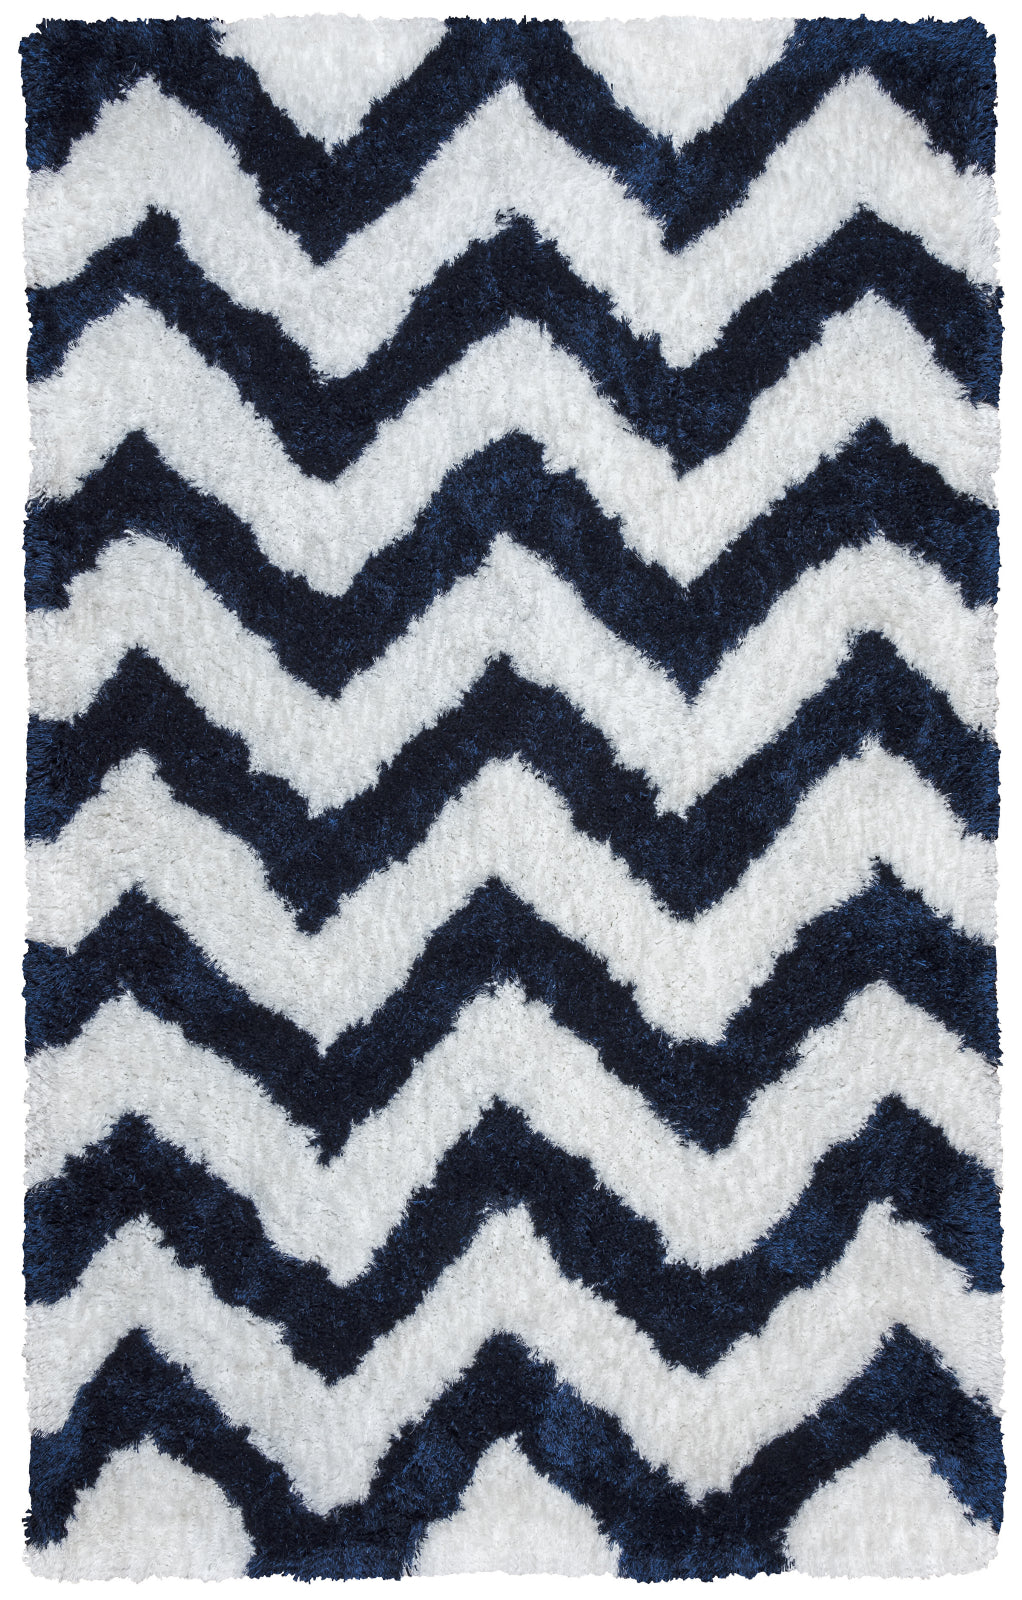 Rizzy Commons CO9495 Navy Area Rug main image